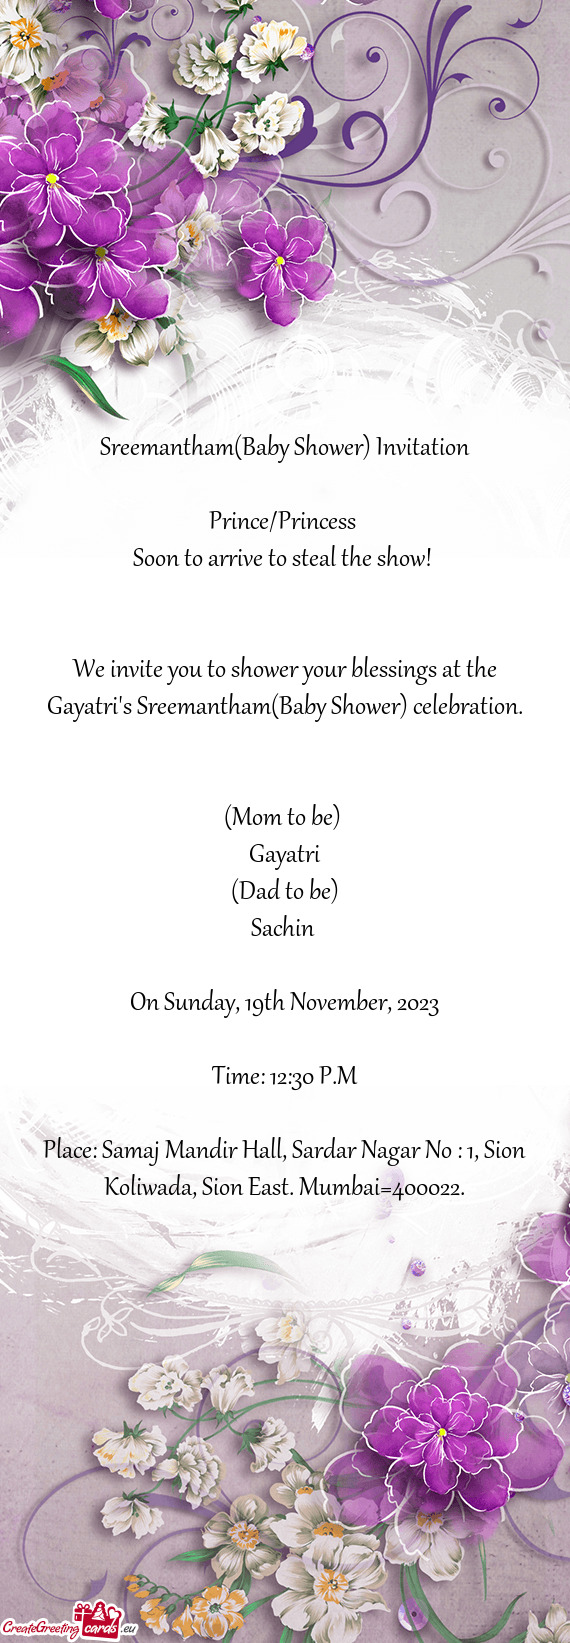 We invite you to shower your blessings at the Gayatri